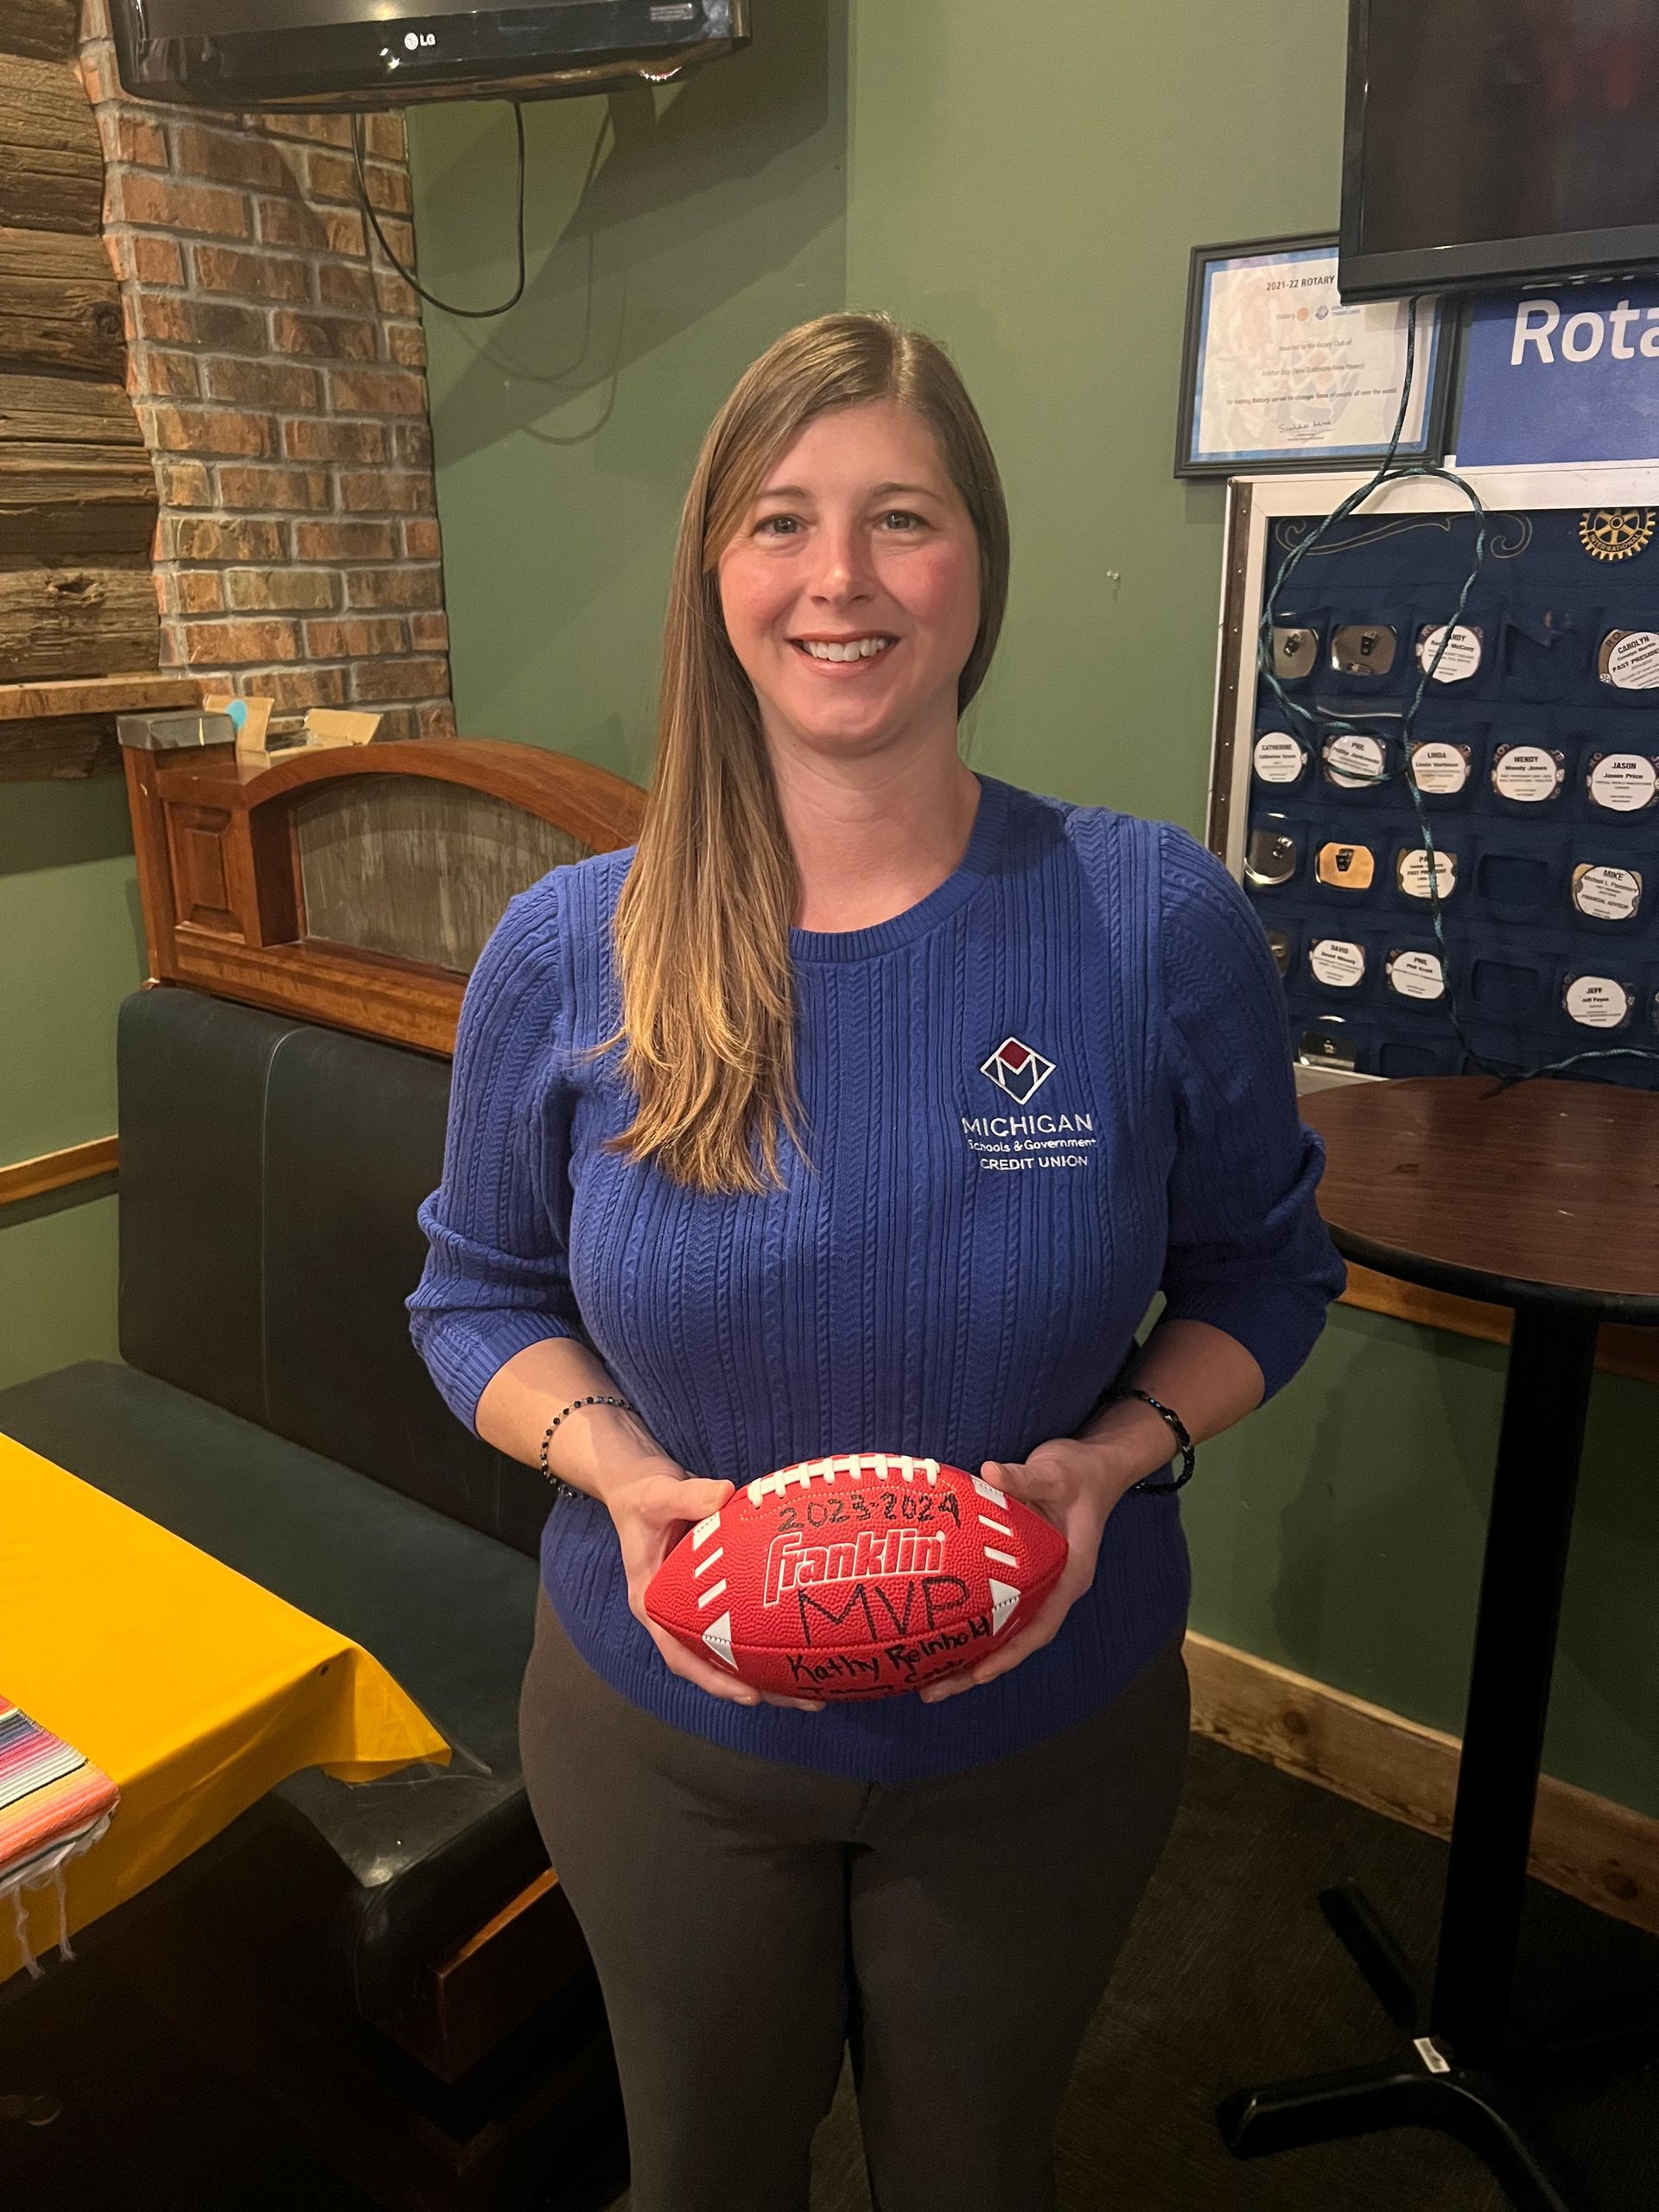 A woman in a blue sweater is holding a red football